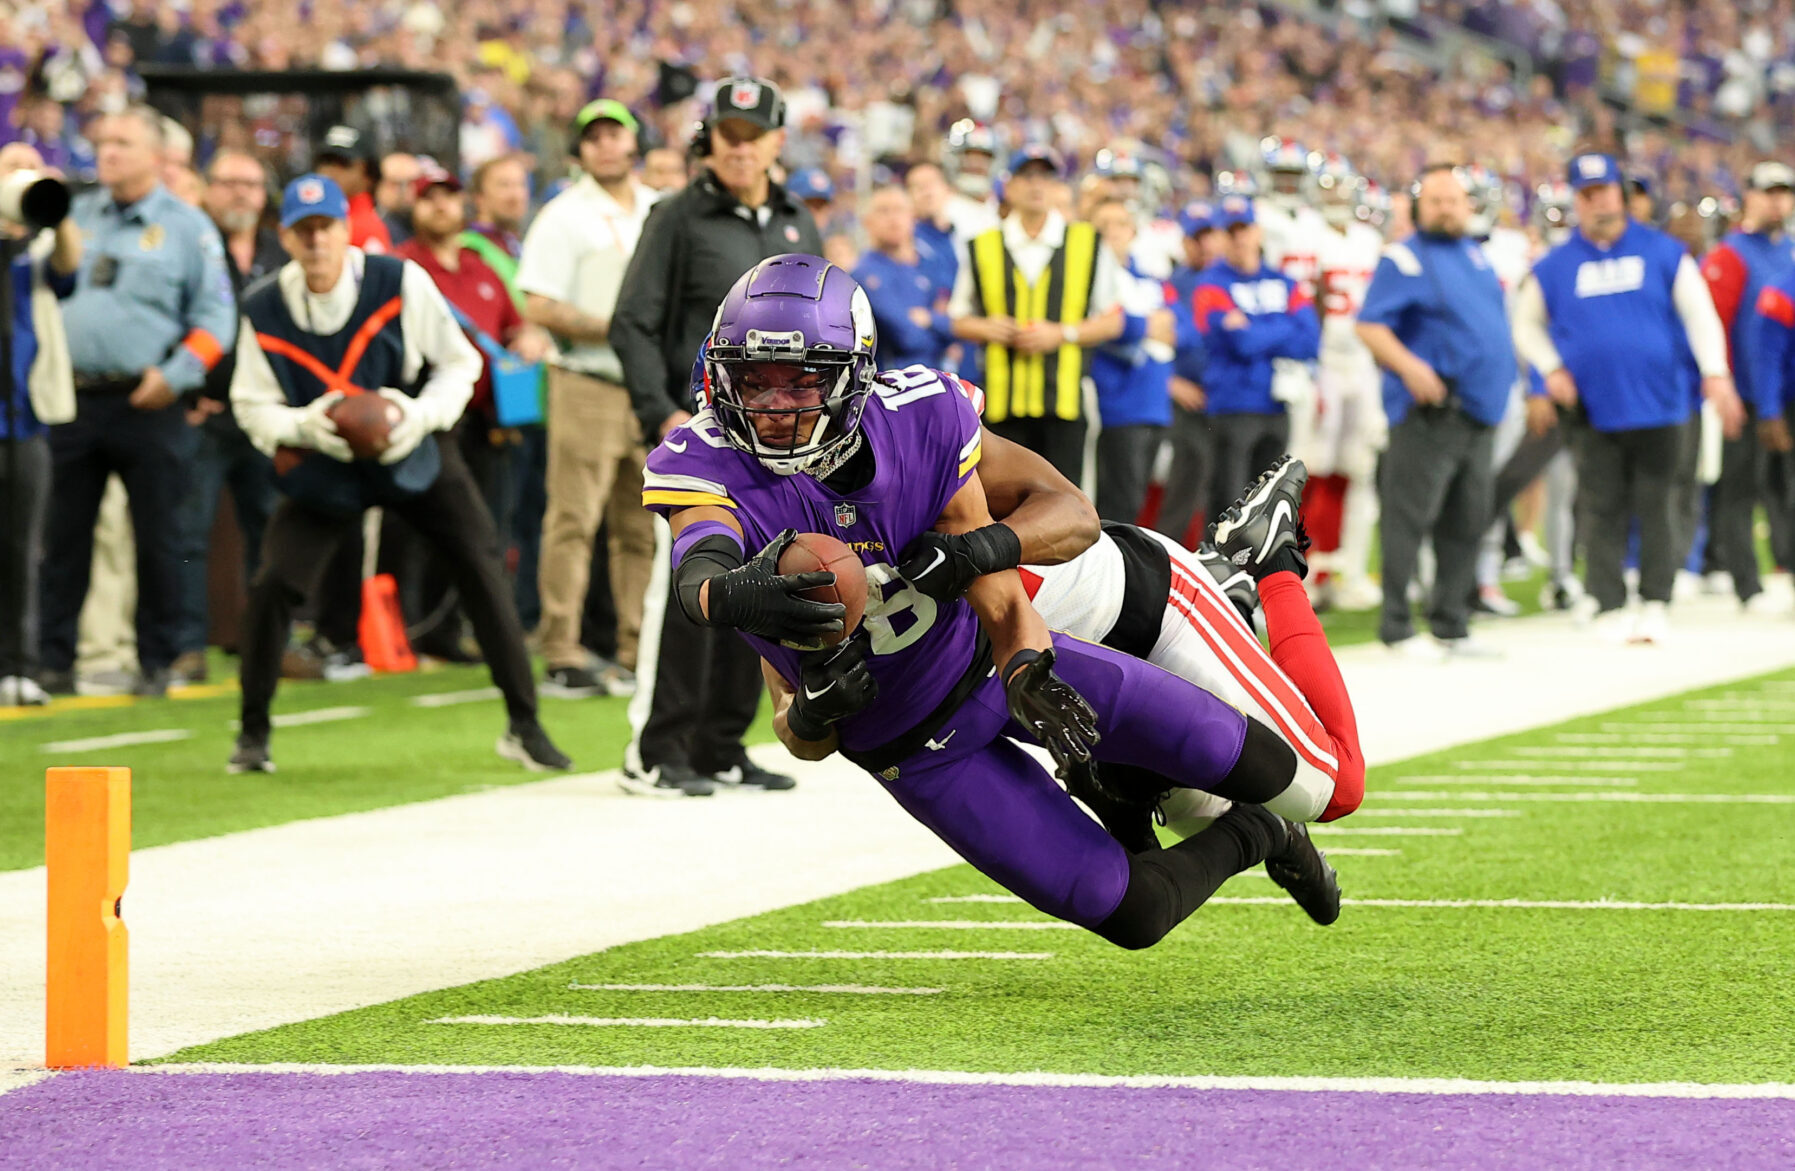 Minnesota Vikings wide receiver Justin Jefferson, in a purple uniform, lunges into the endzone